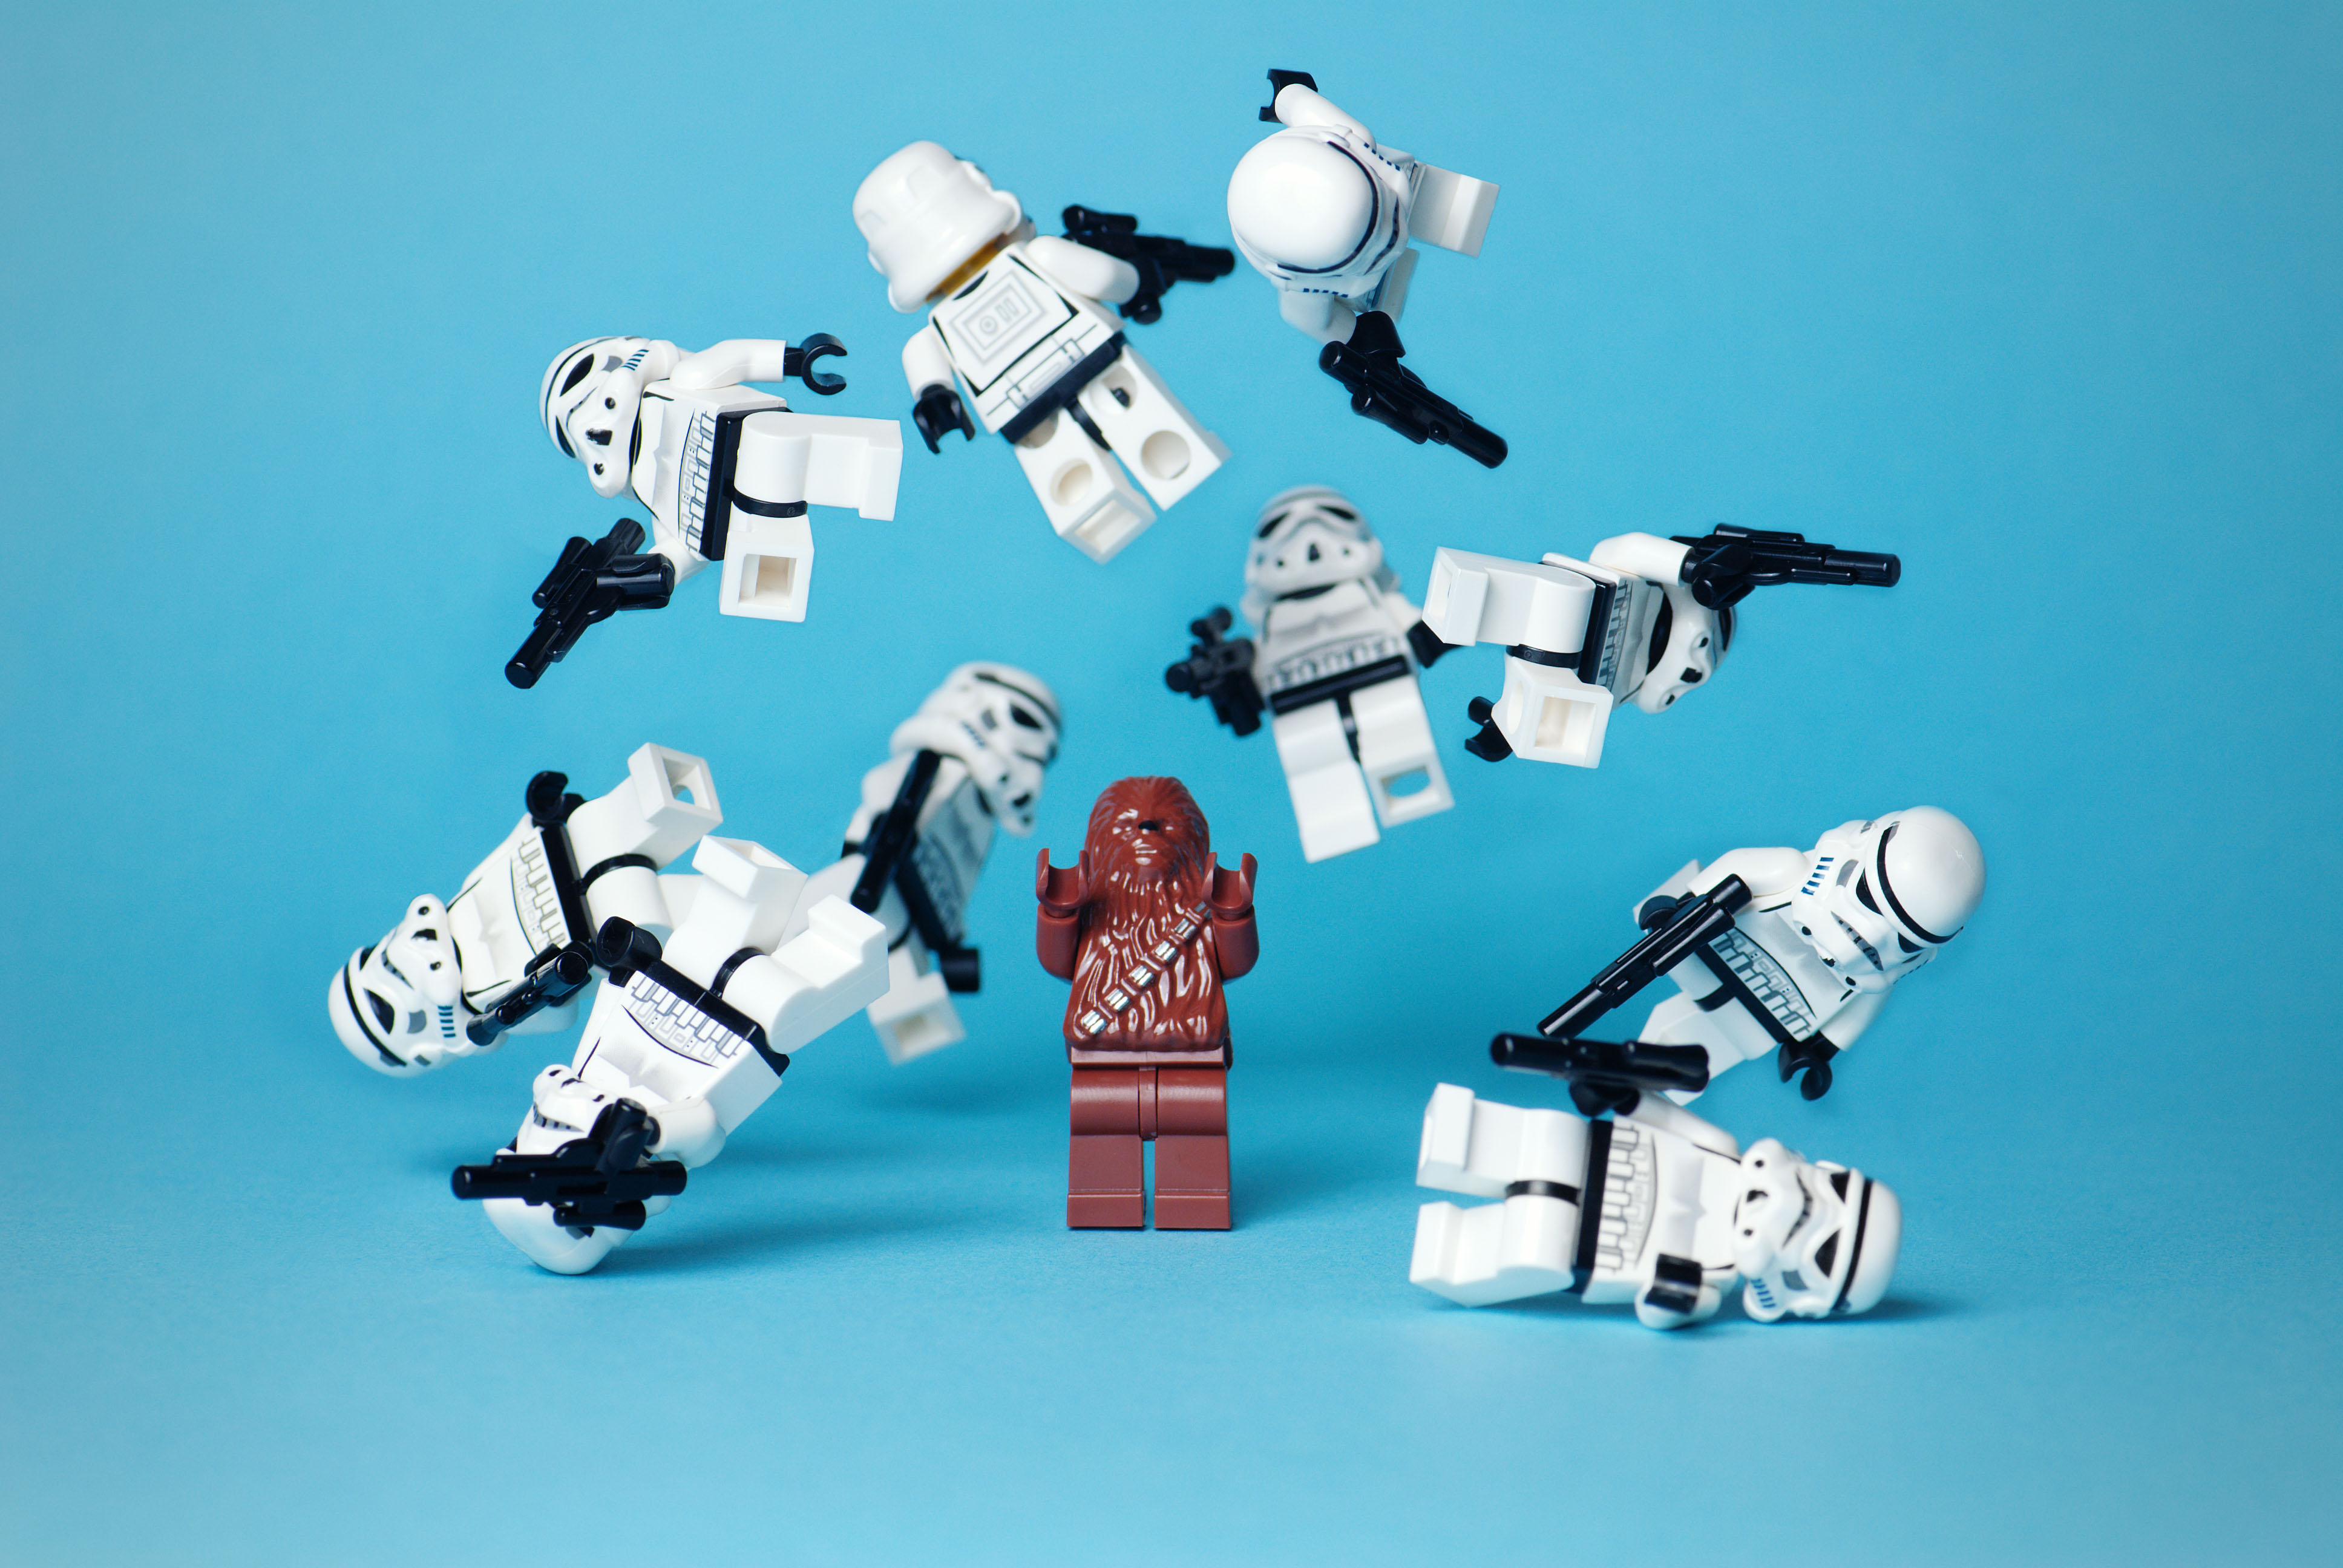 Star Wars Stormtroopers Chewbacca Legos Free Wallpaper Images, Photos, Reviews